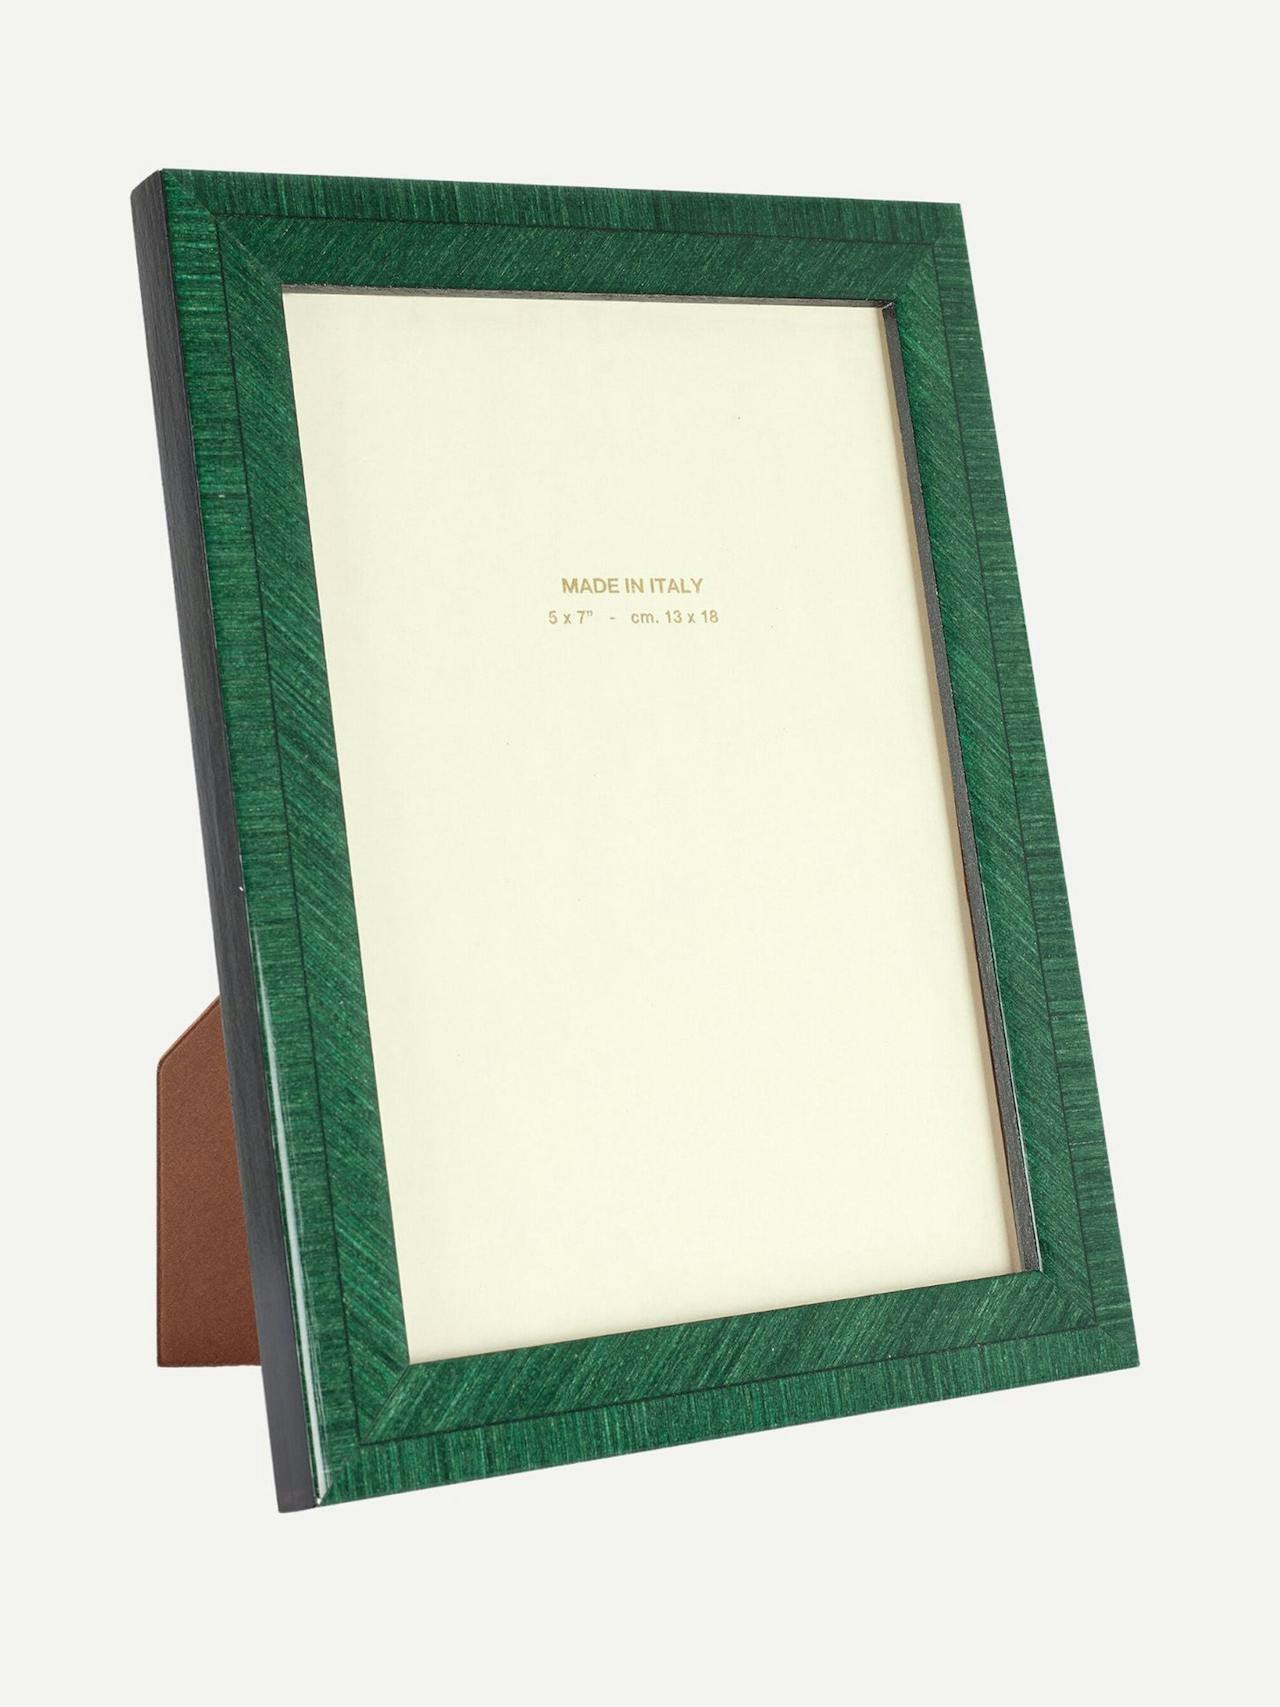 Forest green Bianca photo frame